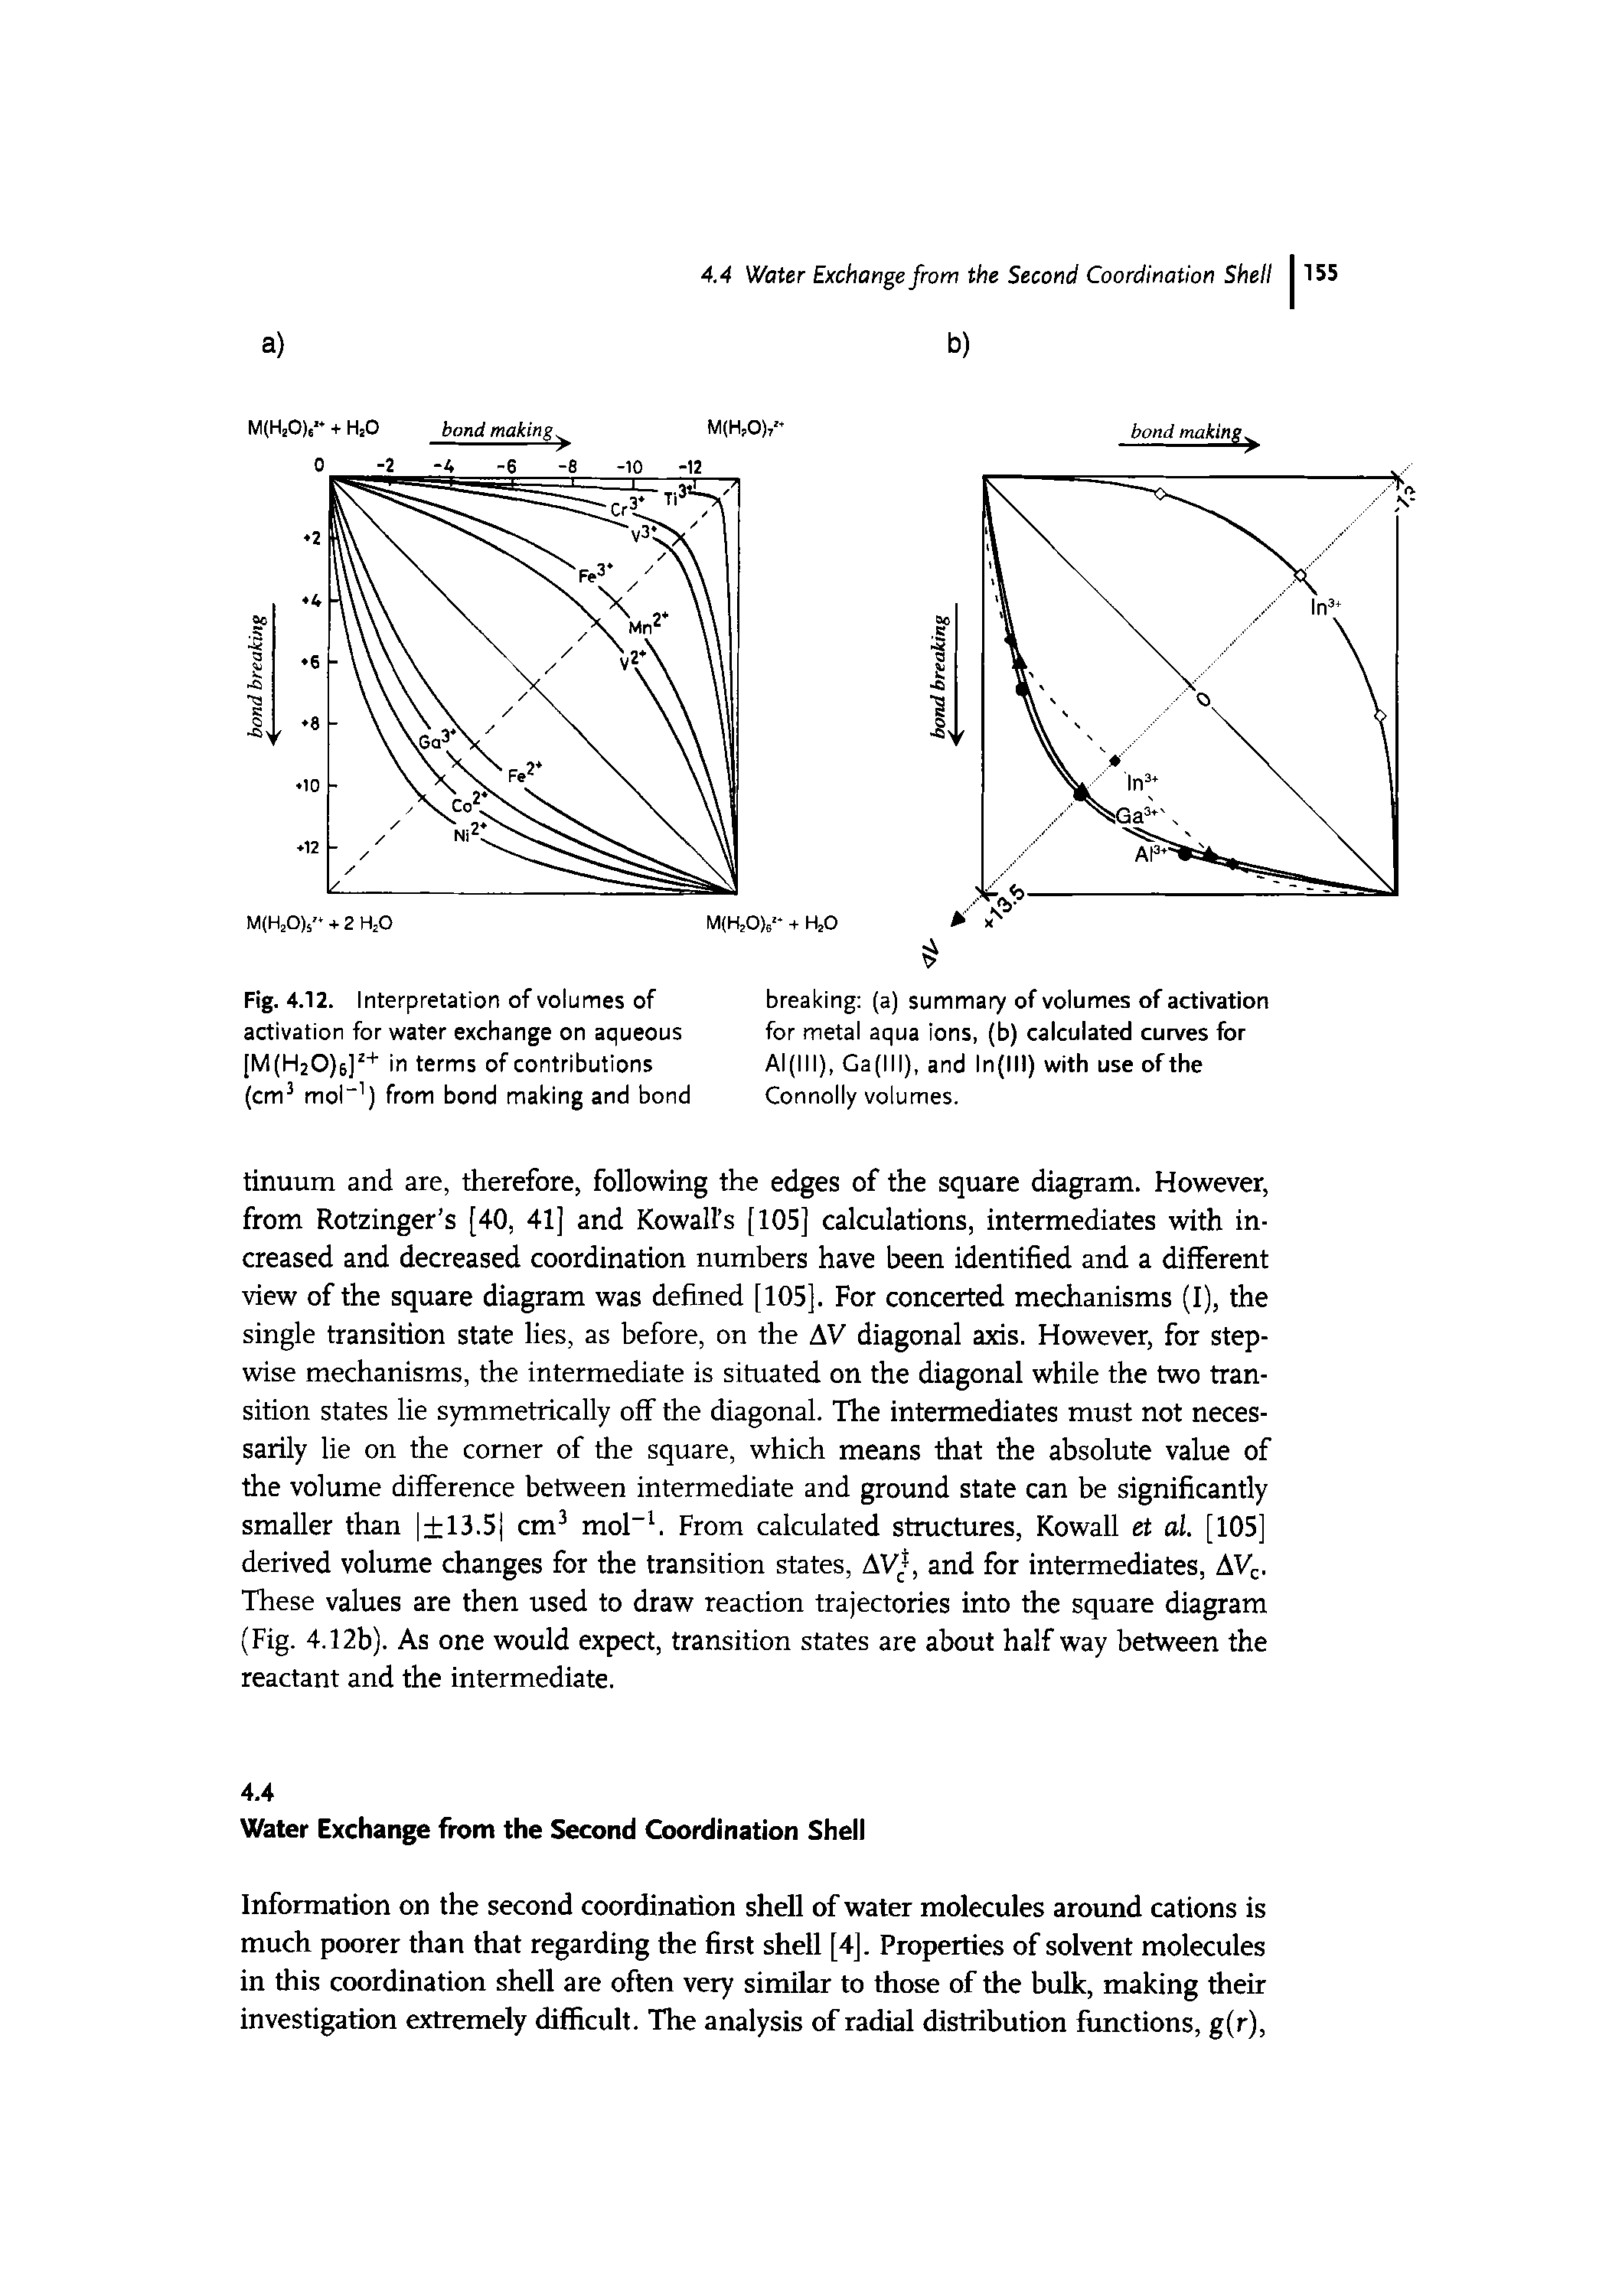 Fig. 4.12. Interpretation of volumes of activation for water exchange on aqueous [M(H20)6] in terms of contributions (cm mol" ) from bond making and bond...